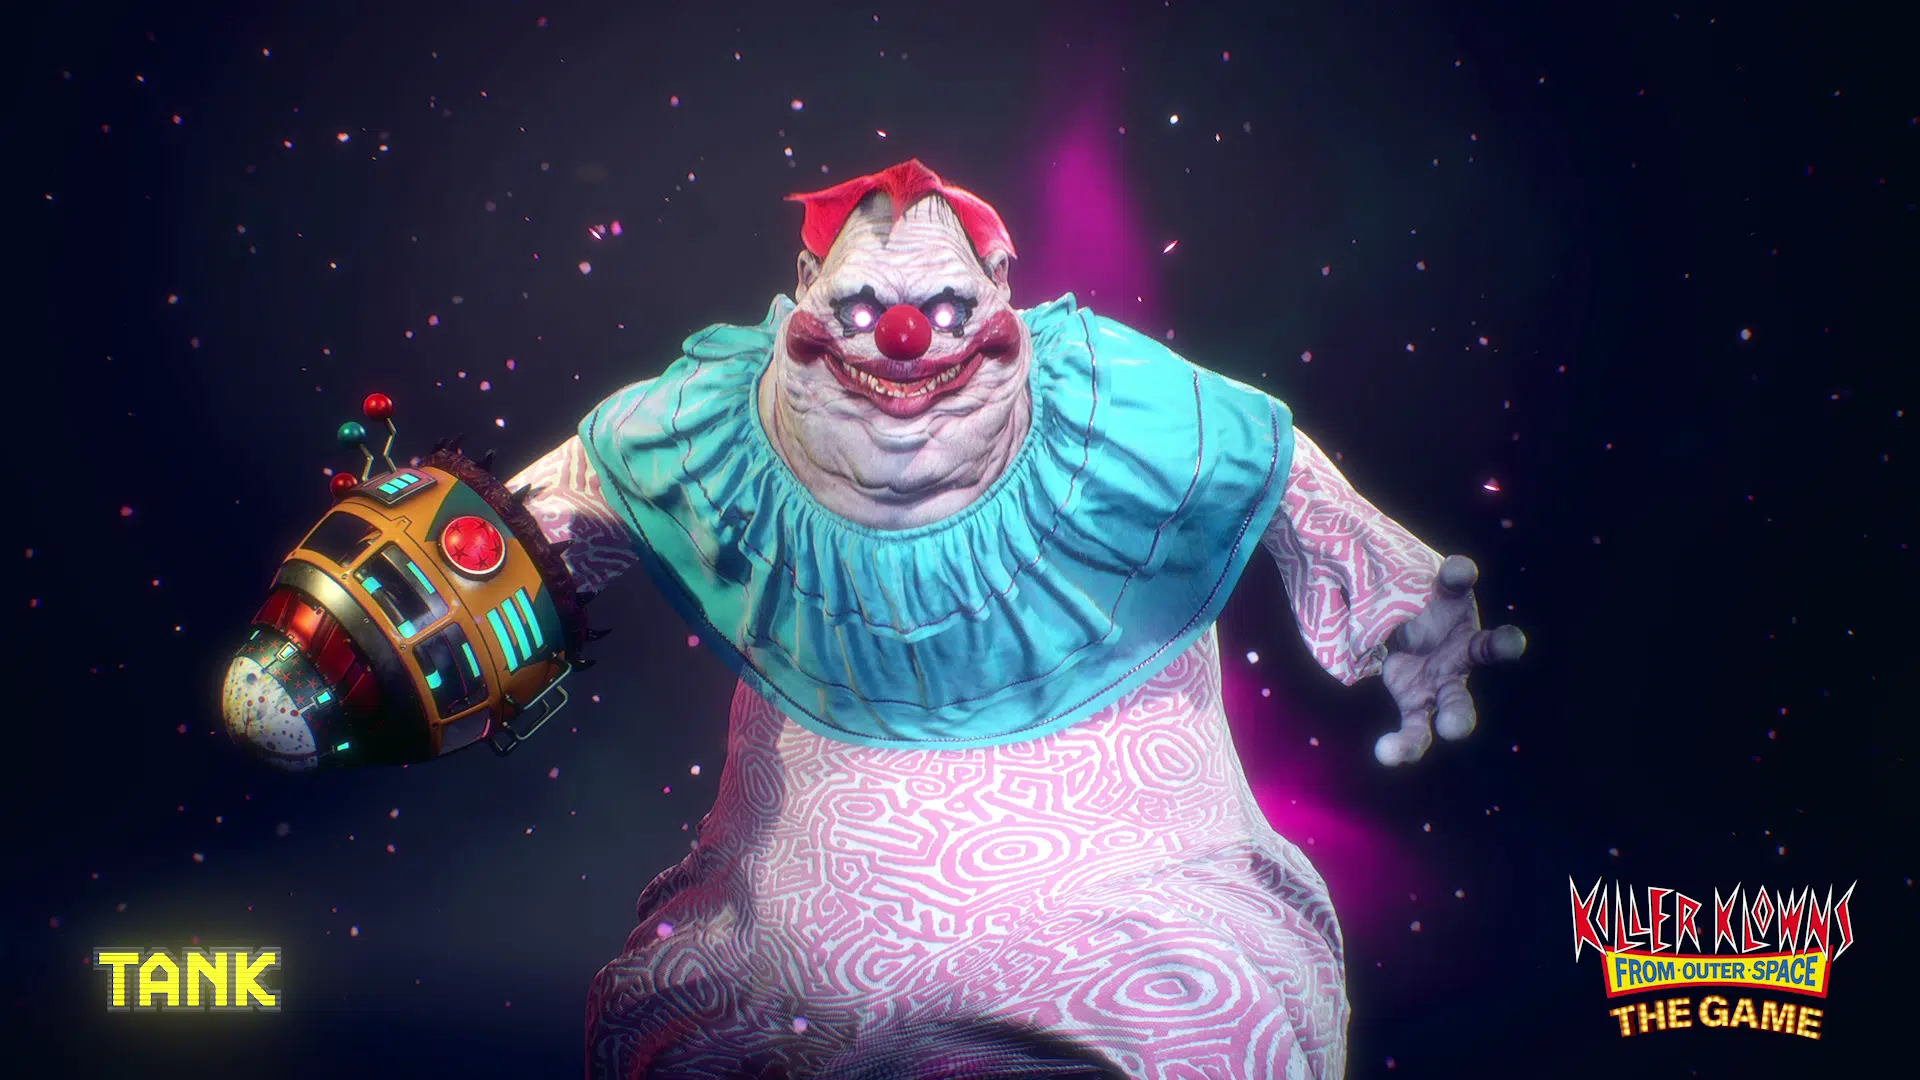 Killer Klowns from Outer Space the game trailer